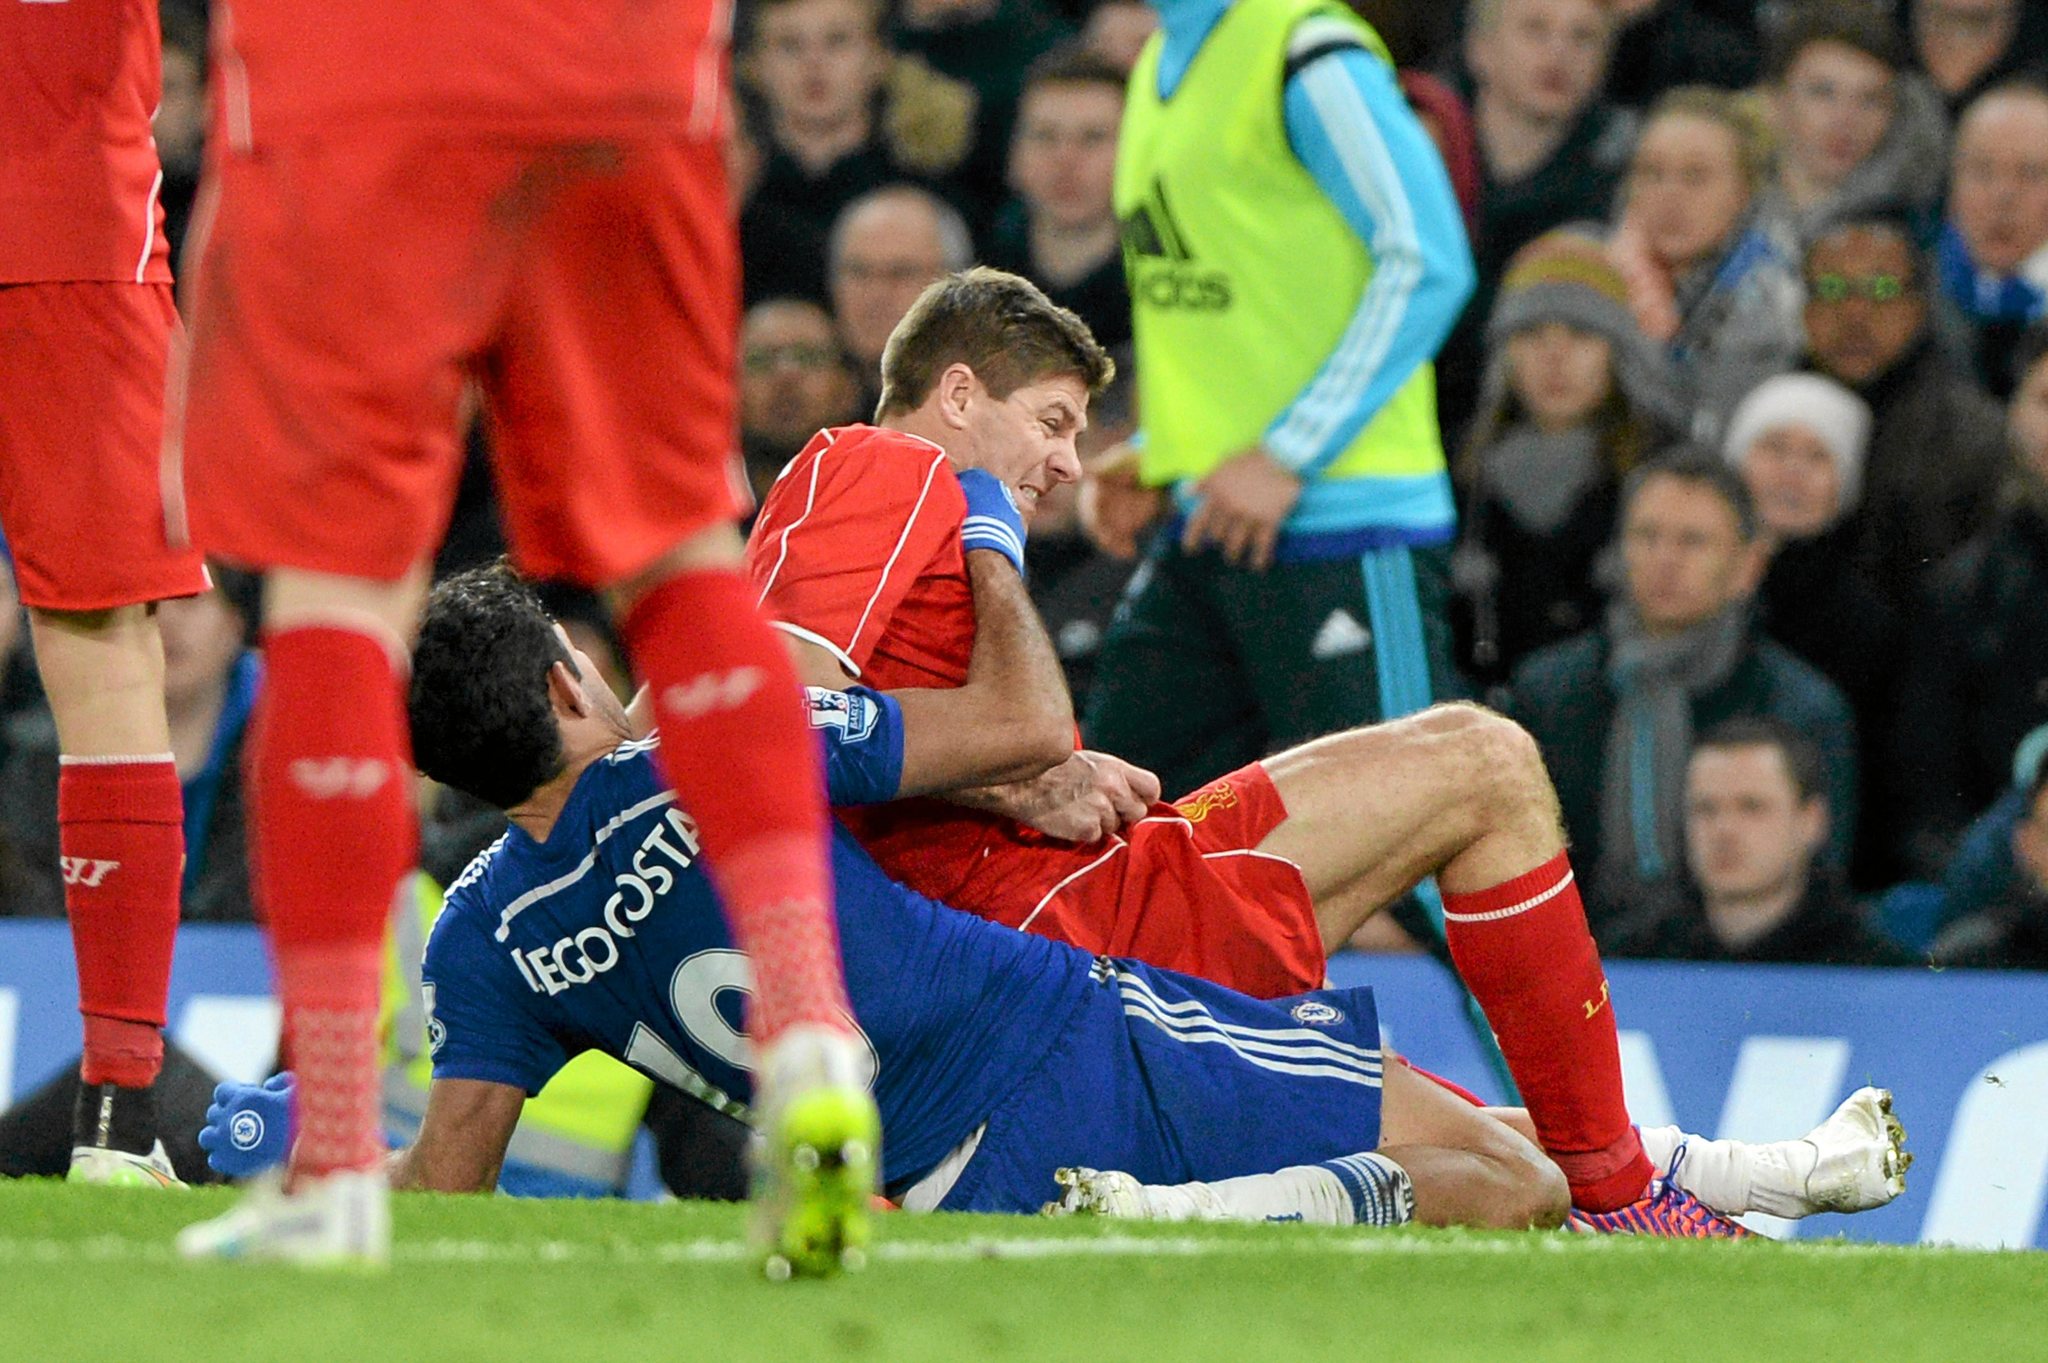 Chelseas Brazilian-born Spanish striker Diego Costa (L) and Liverpools English midfielder Steven lt;HIT gt;Gerrard lt;/HIT gt; (R) start to tussle on the floor after a challenge, an incident for which they were both booked, during the English League Cup semi-final second leg football match between Chelsea and Liverpool at Stamford Bridge in London on January 27, 2015. AFP PHOTO / GLYN KIRK RESTRICTED TO EDITORIAL USE. No use with unauthorized audio, video, data, fixture lists, club/league logos or 